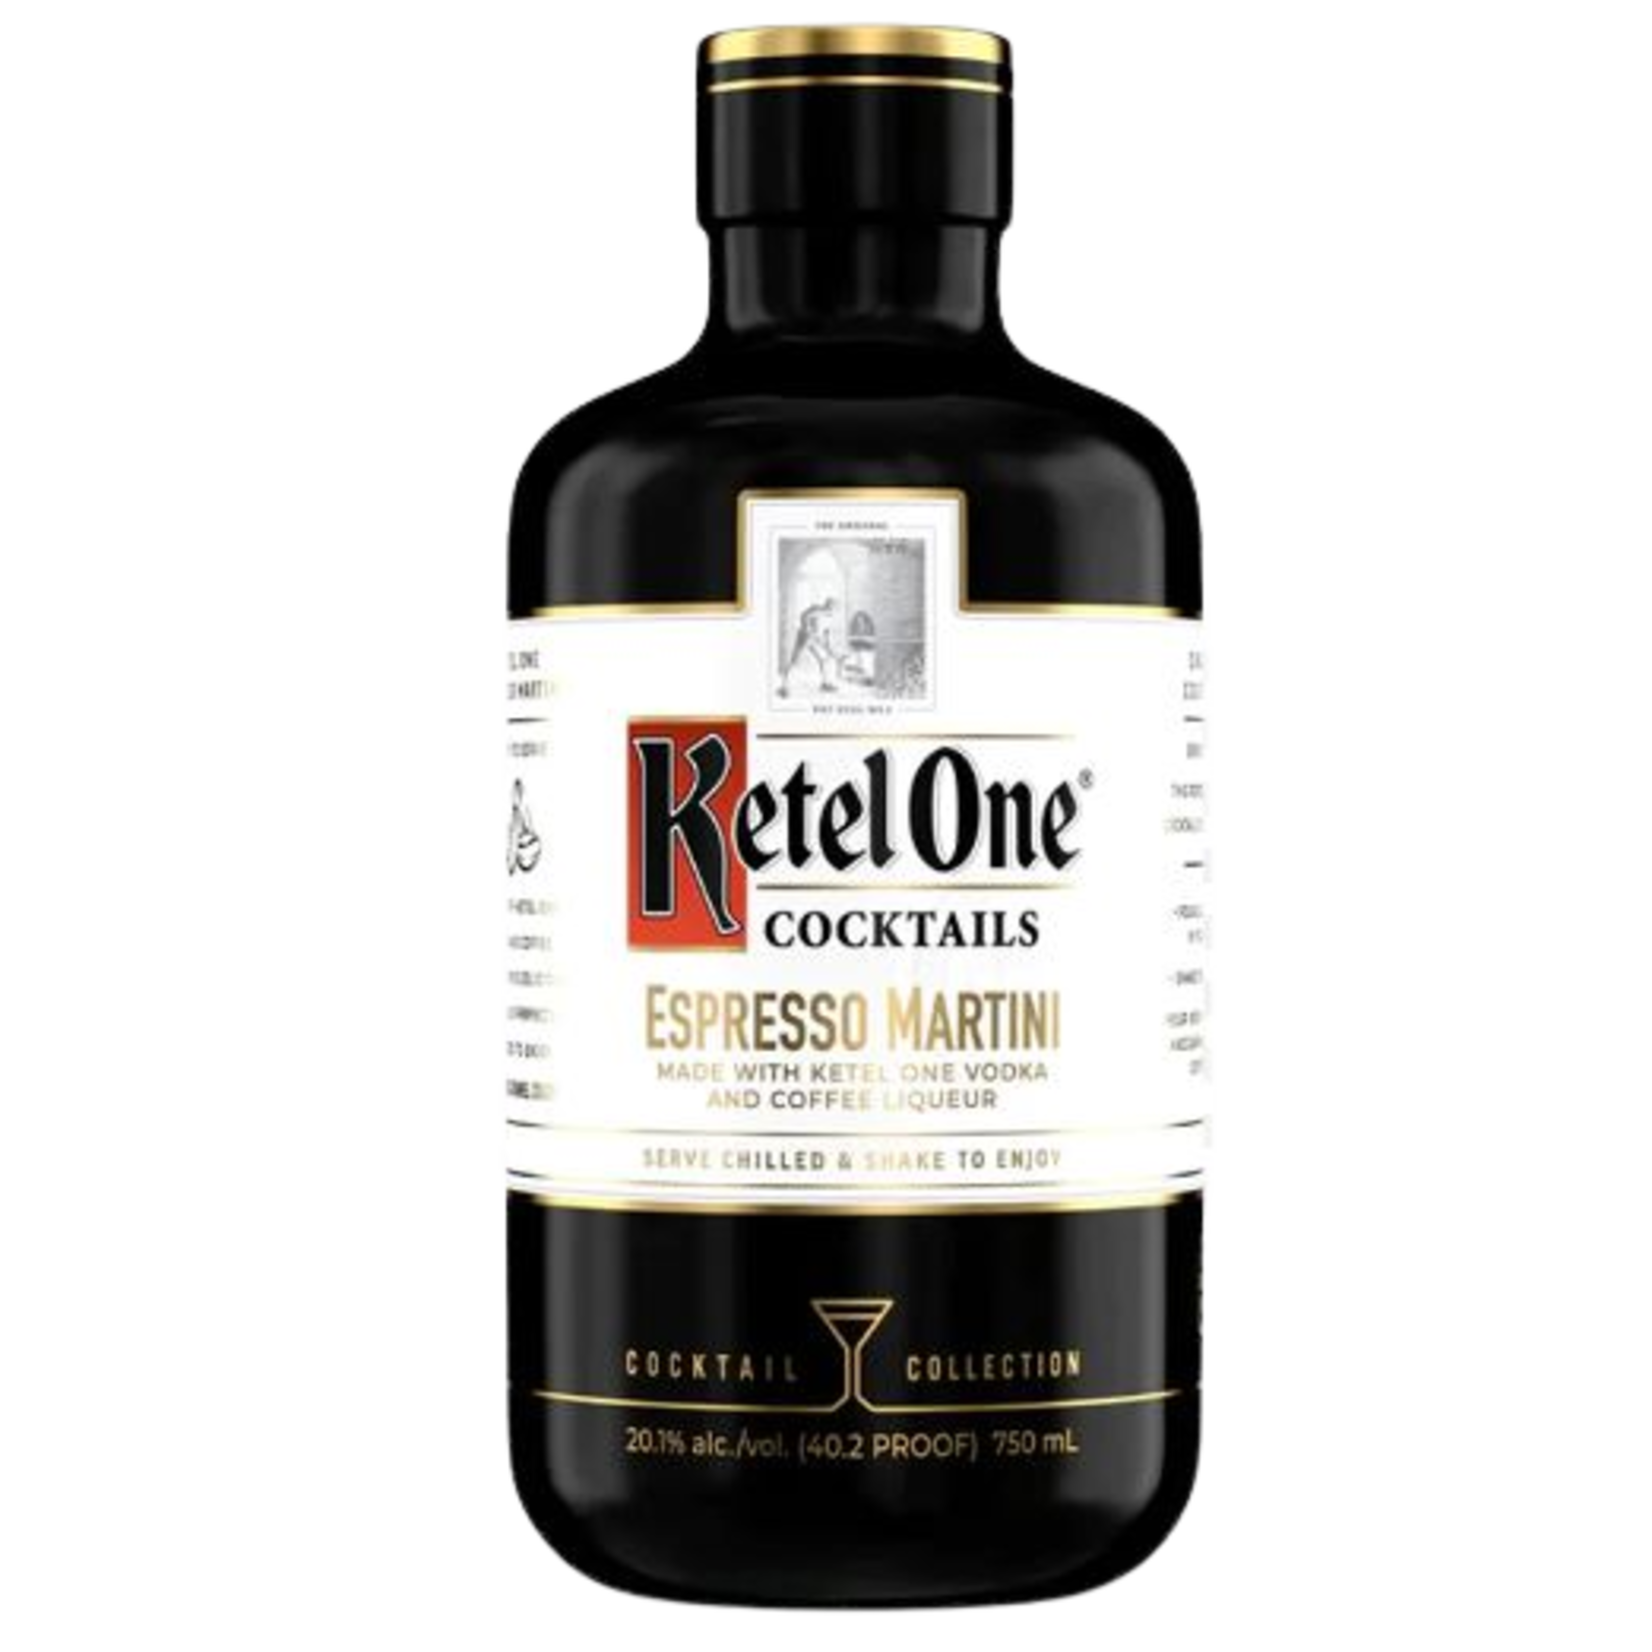 Ketel One Ketel One Cocktails Pre-mixed Espresso Martini 375 ml Bottle